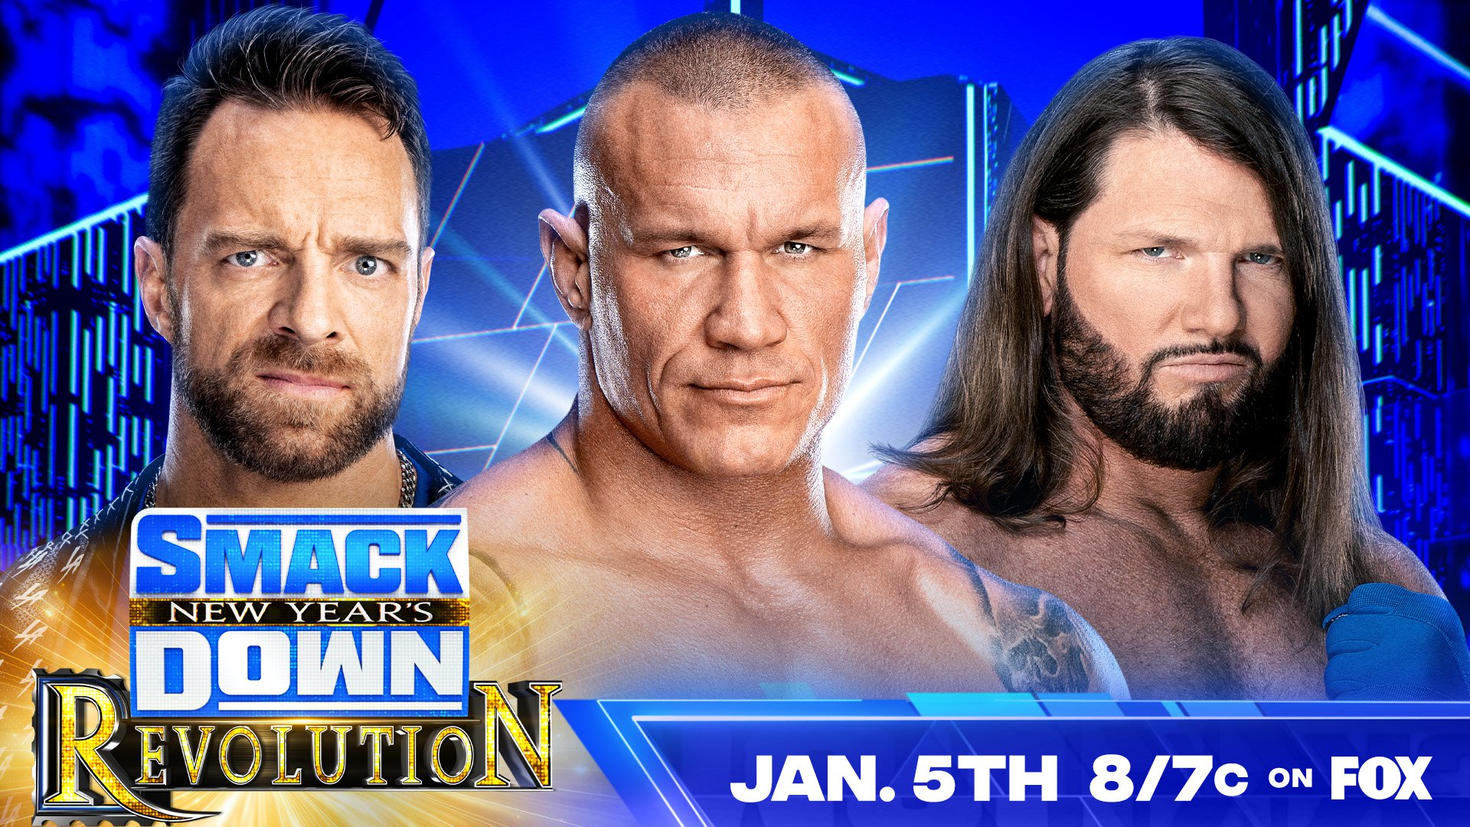 A promotional graphic for the New Year's Revolution edition of WWE SmackDown.